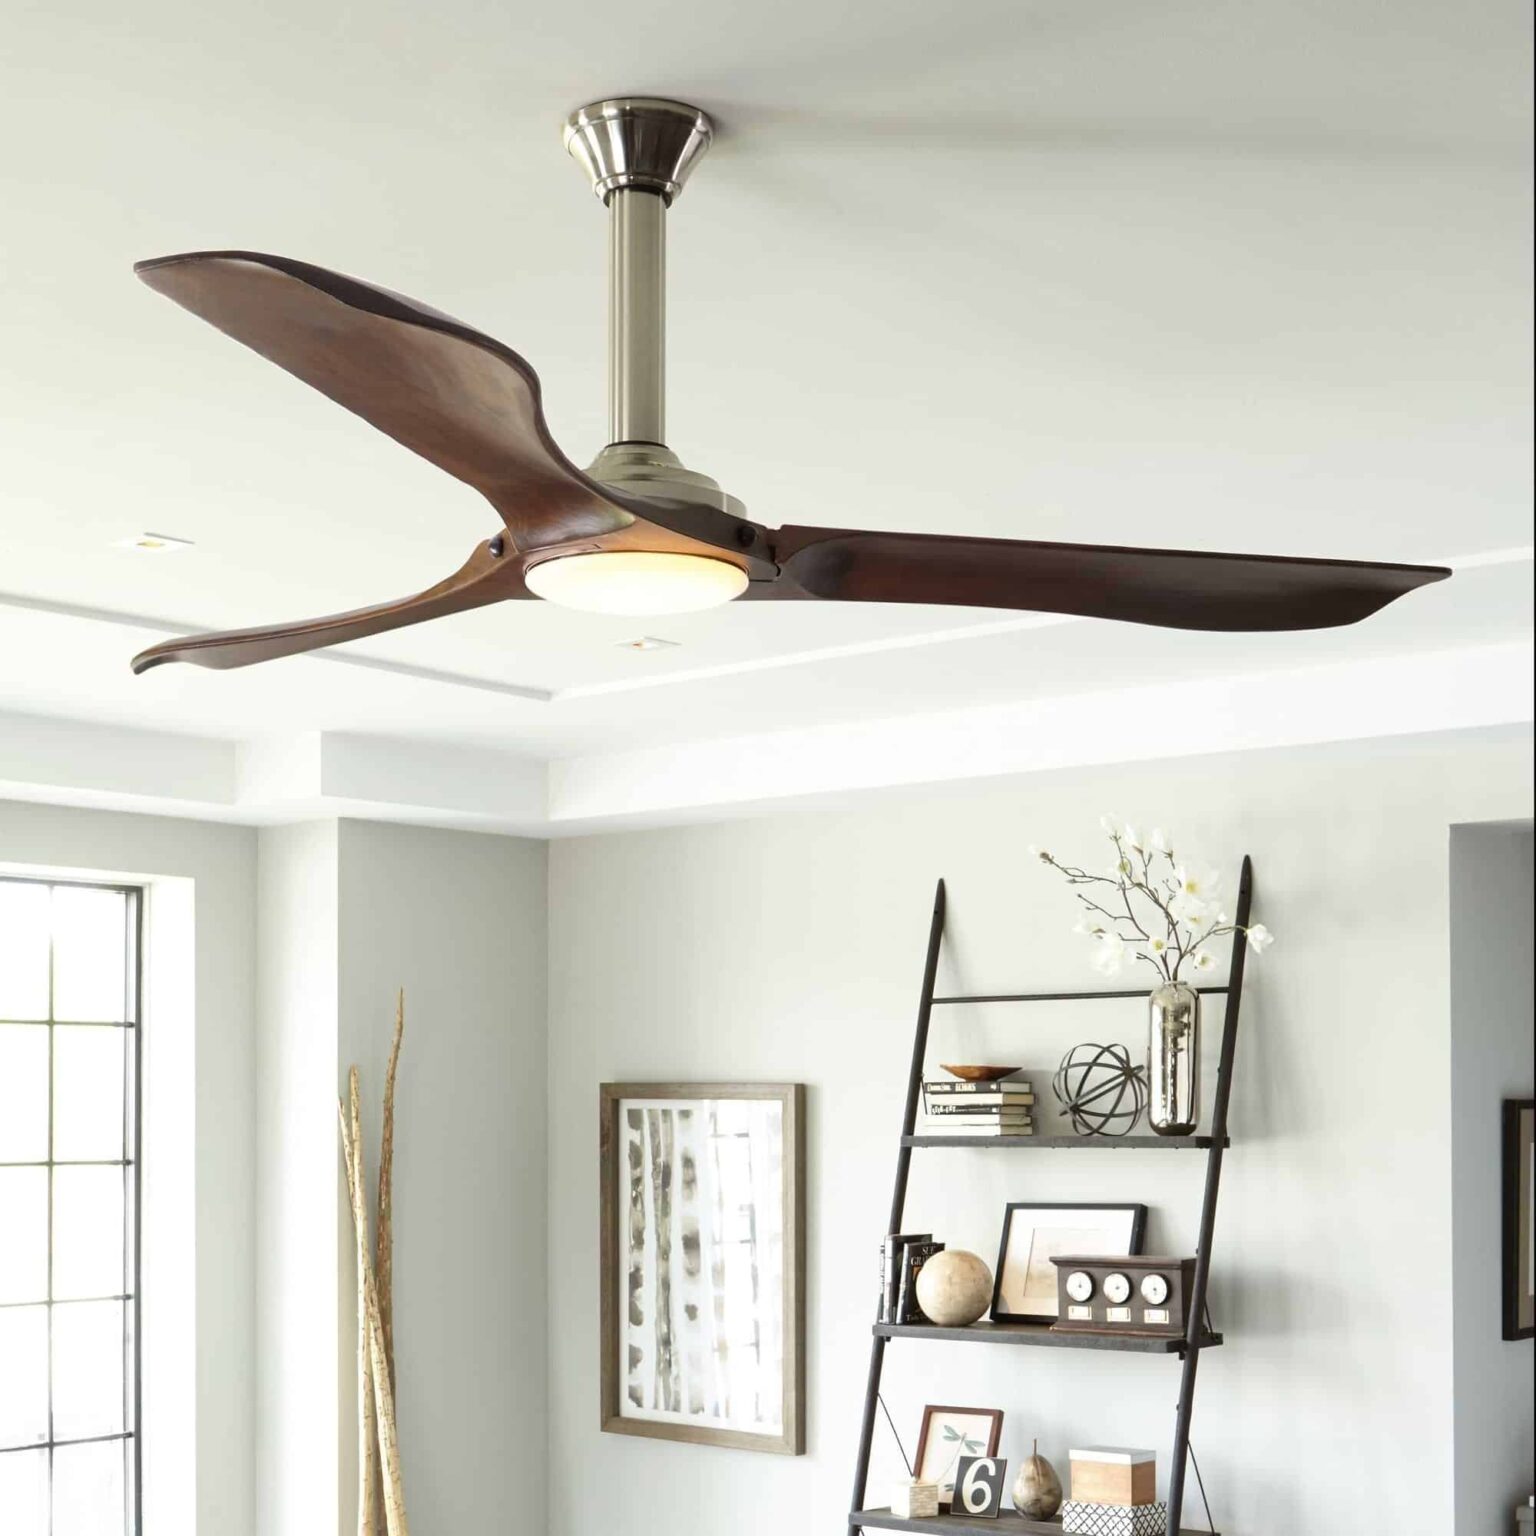 Best ceiling fans in India | Top fan brands & companies with price